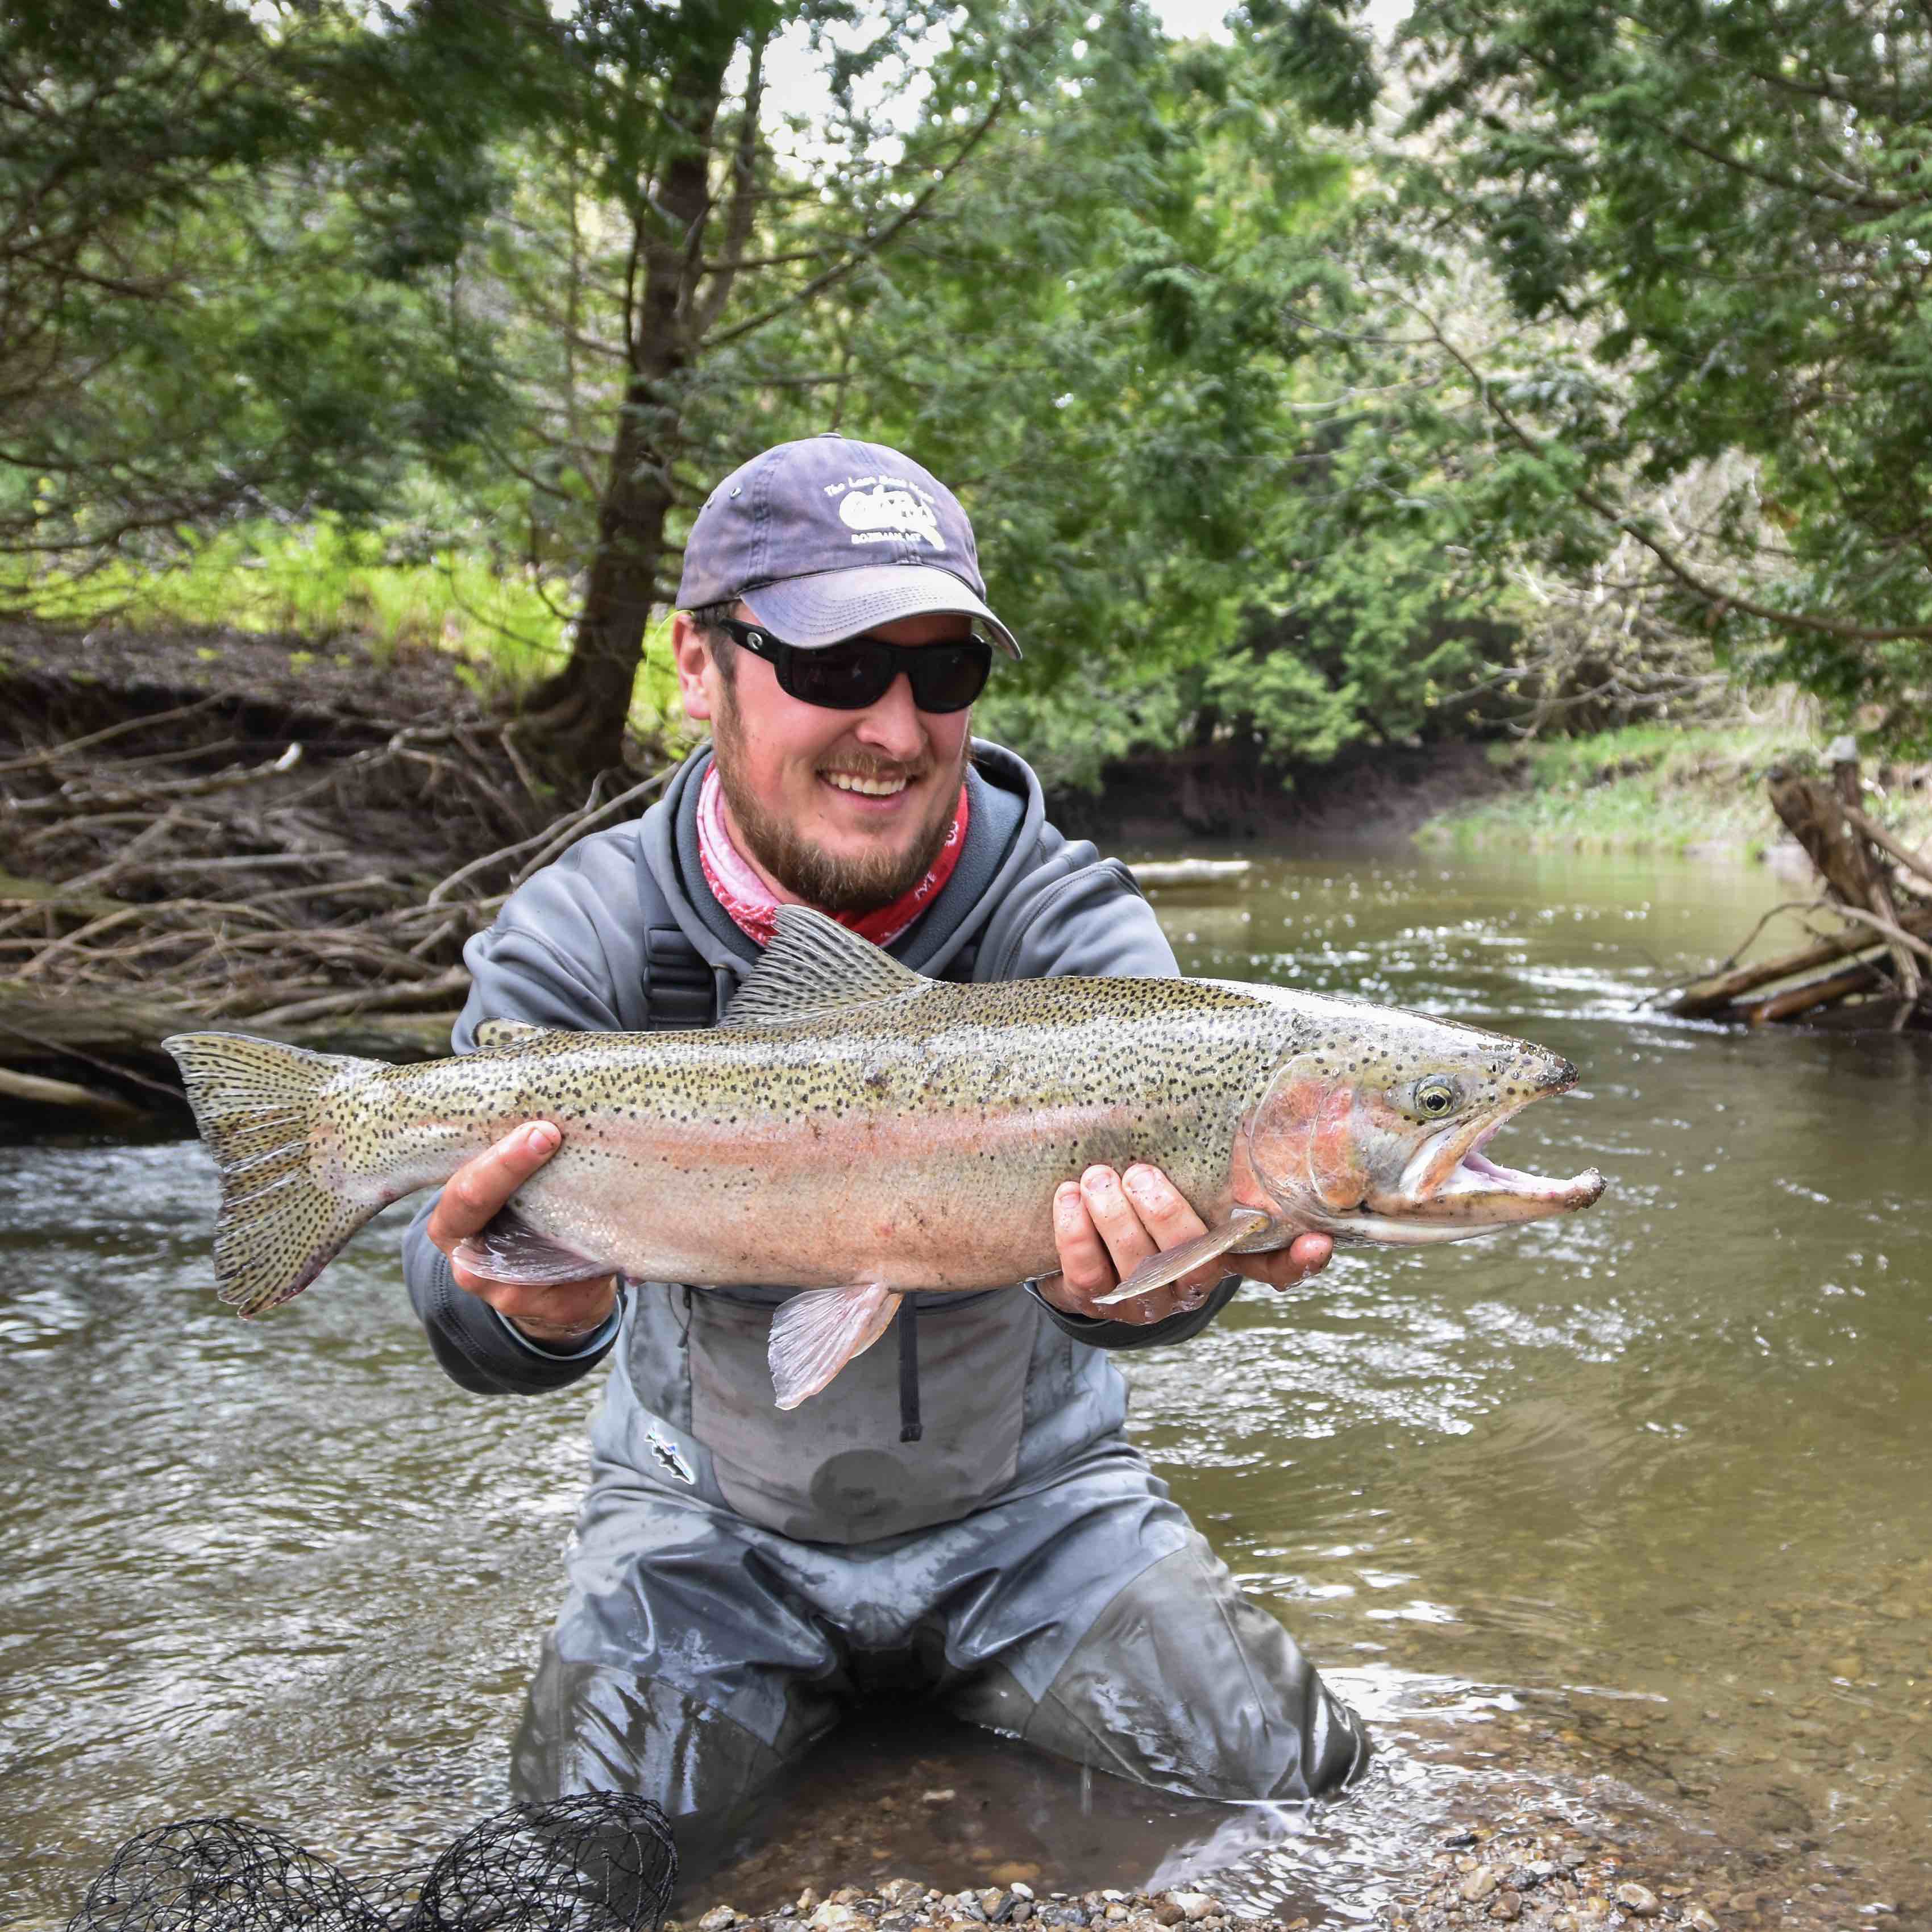 How Fly Fishing Made Me a Worse Fisherman